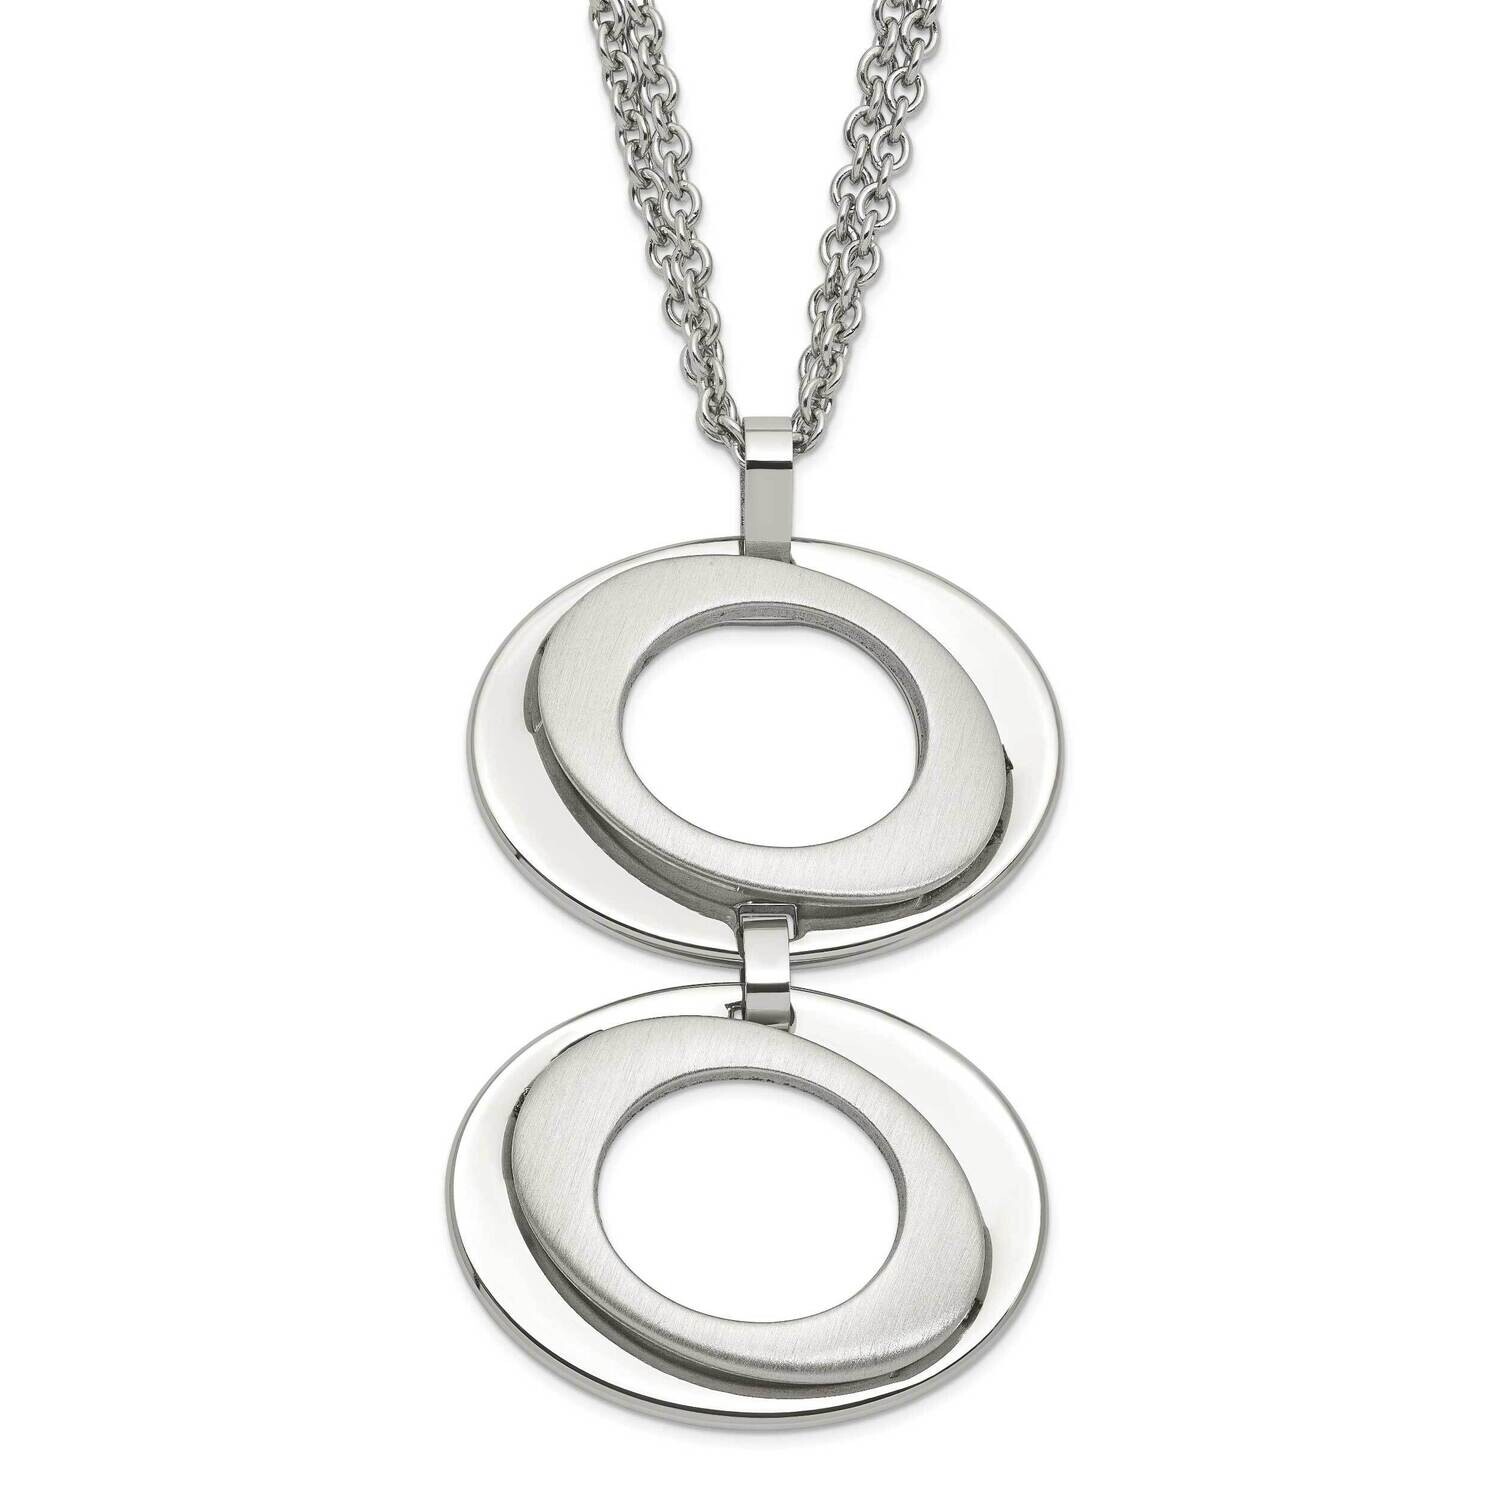 Brushed & Polished Circles 16.5 Inch 1 Inch Extension Necklace Stainless Steel SRN812-16.5